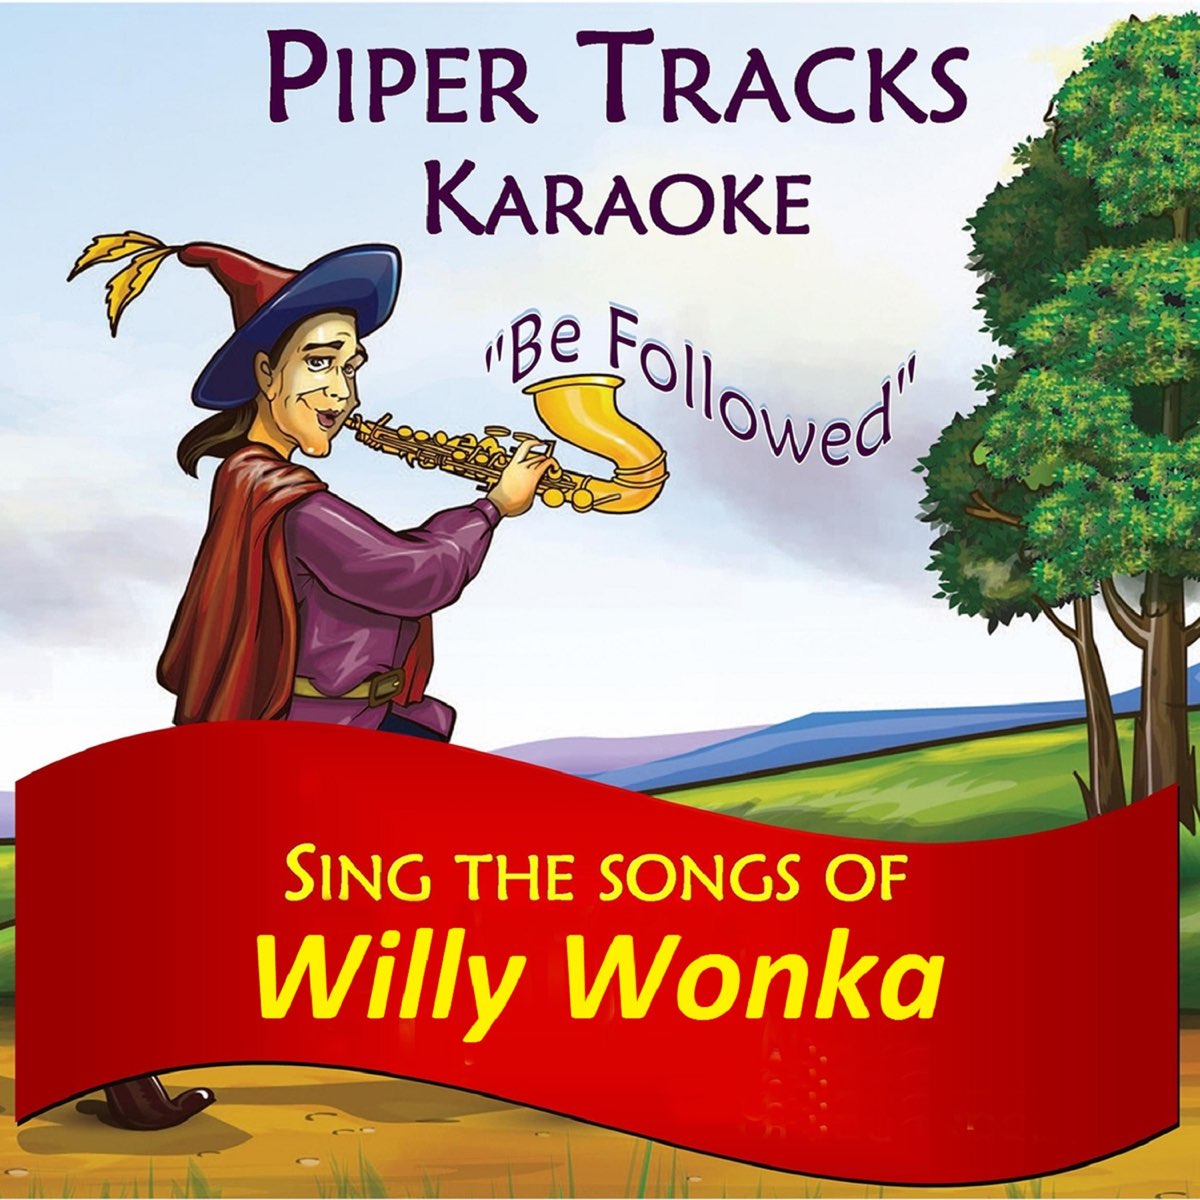 Sing the Songs of "Willy Wonka" (Karaoke) by Piper Tracks on Apple Music